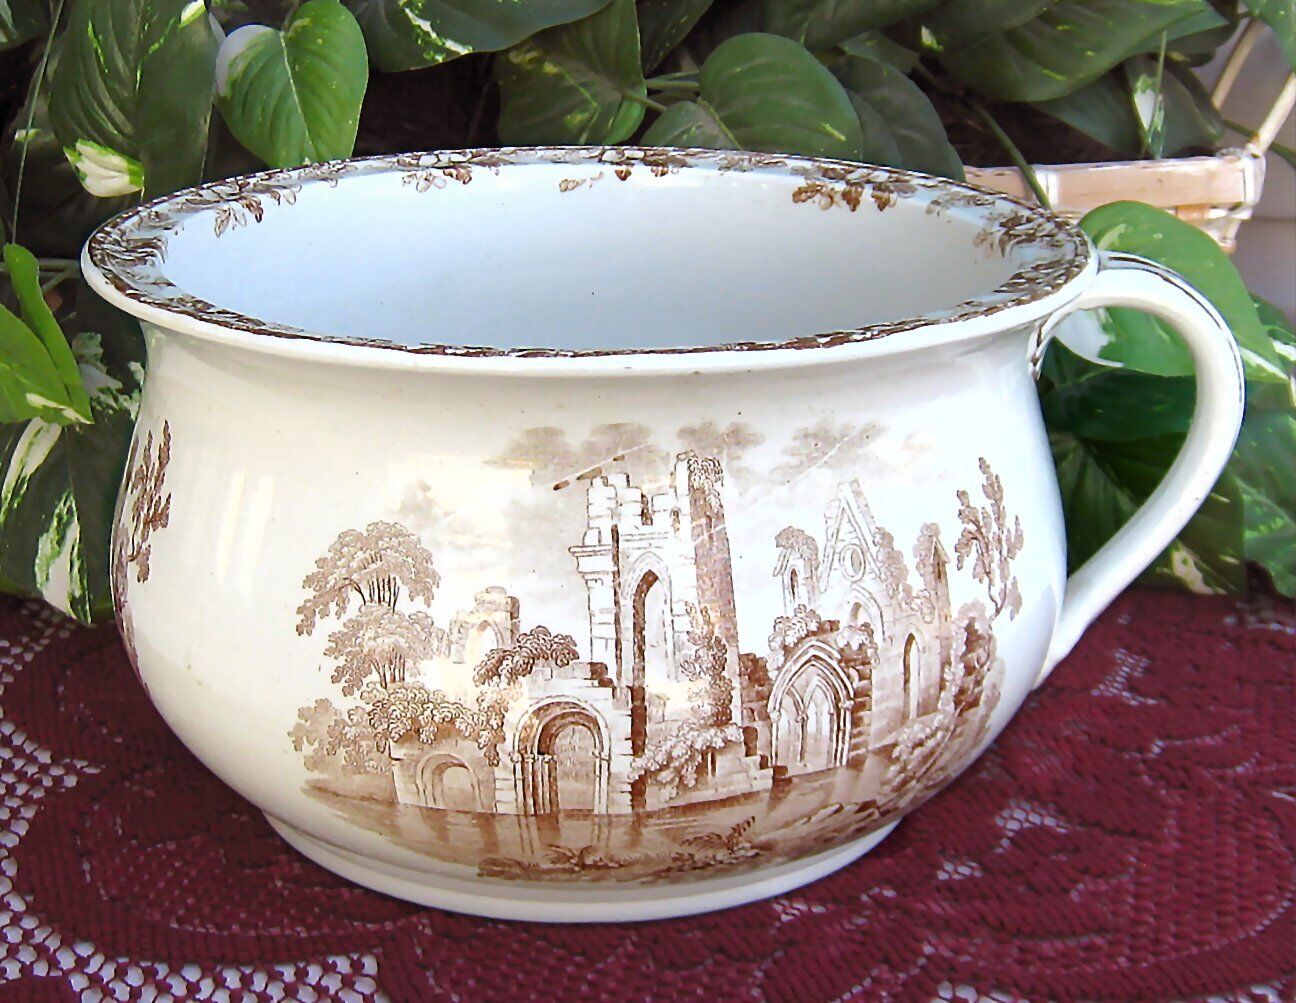 W.T COPELAND & SONS Brown Transferware CHAMBER POT circa 1867-90  from England 